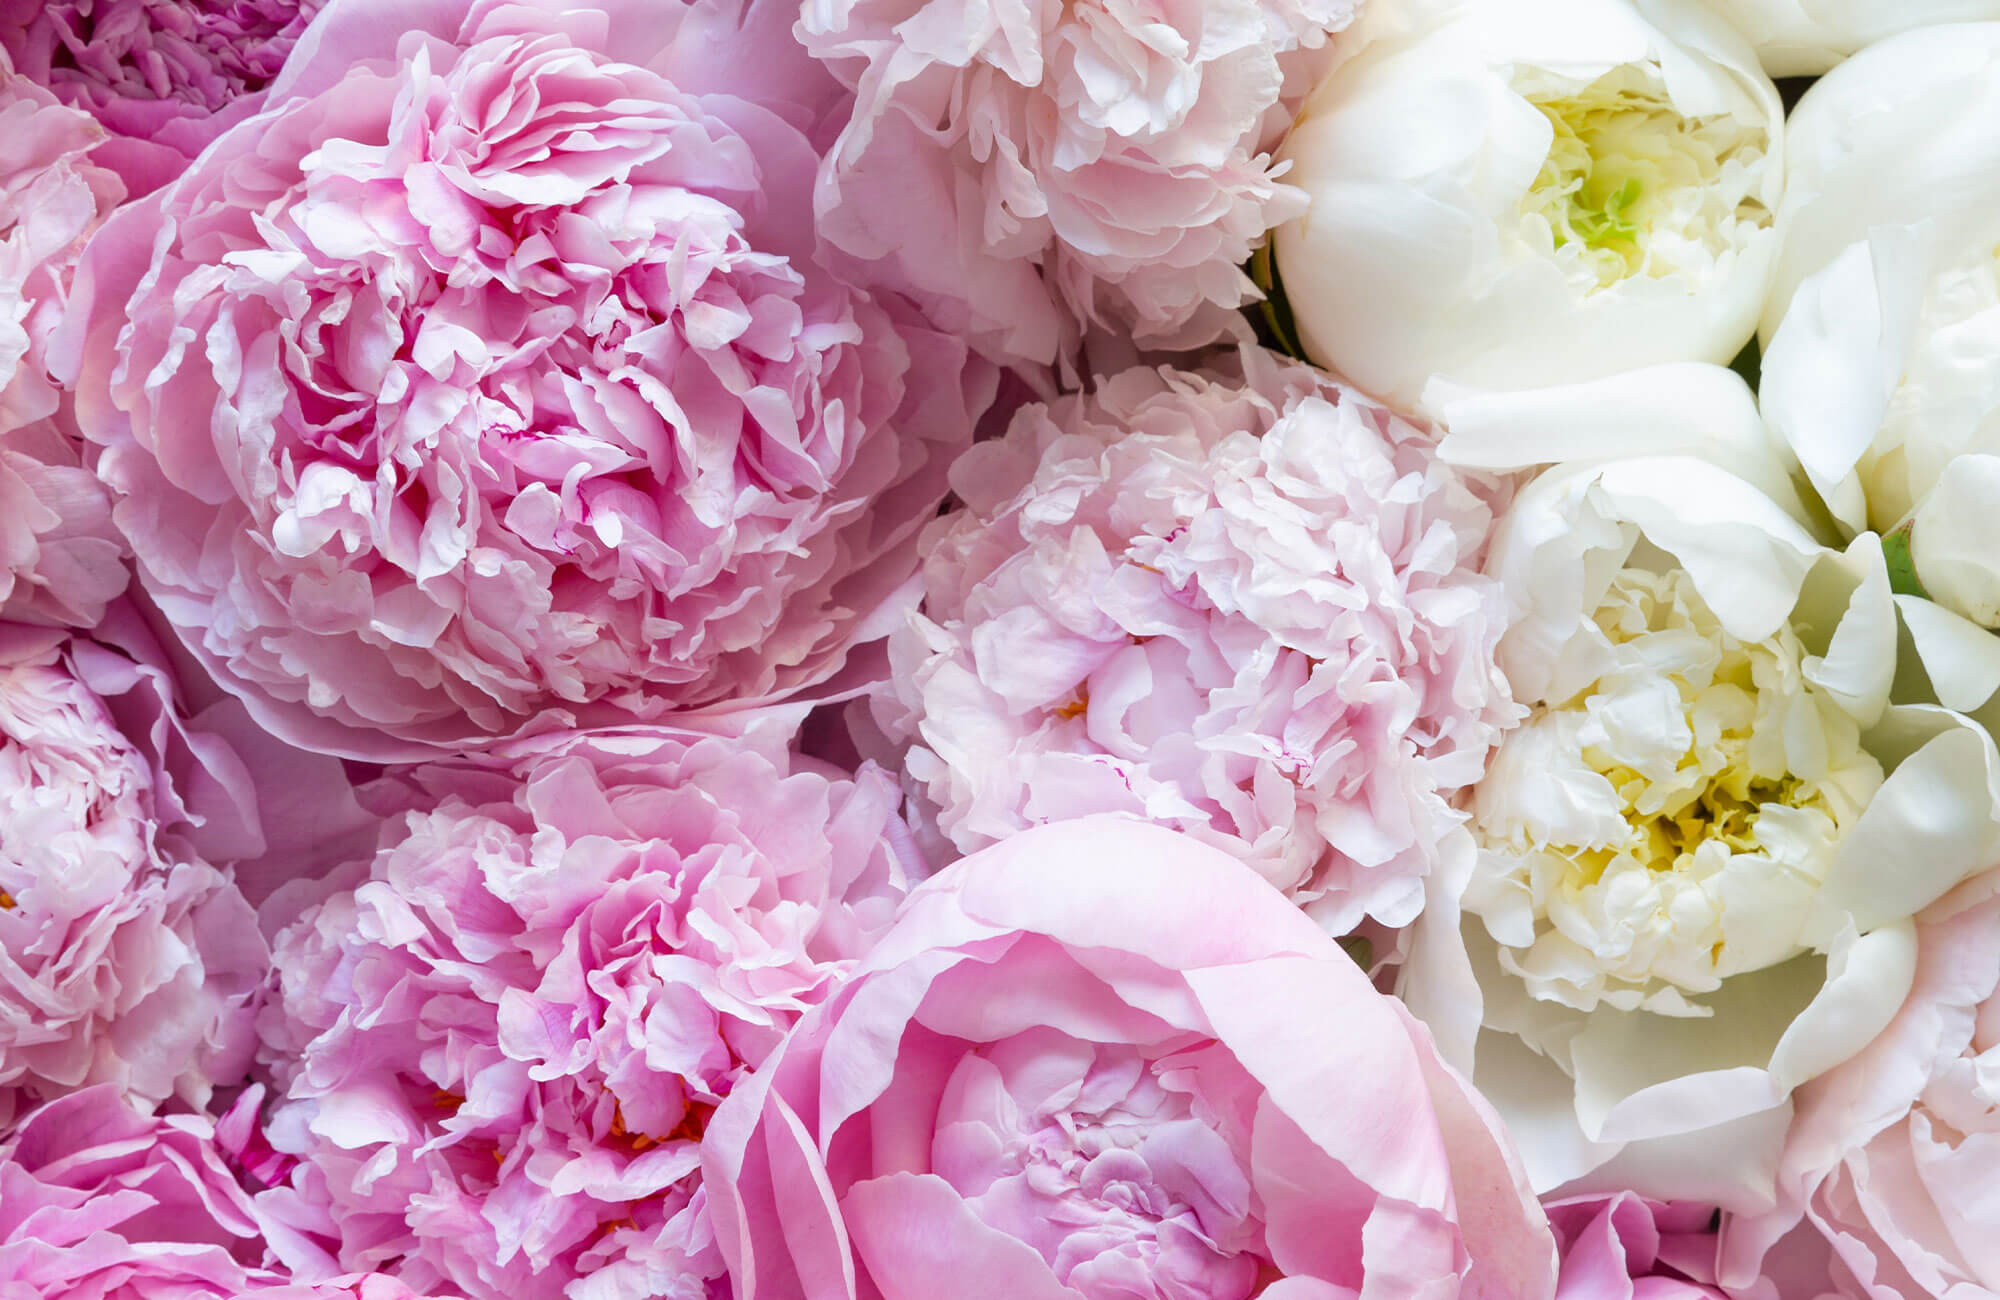 Peony facts for gardeners